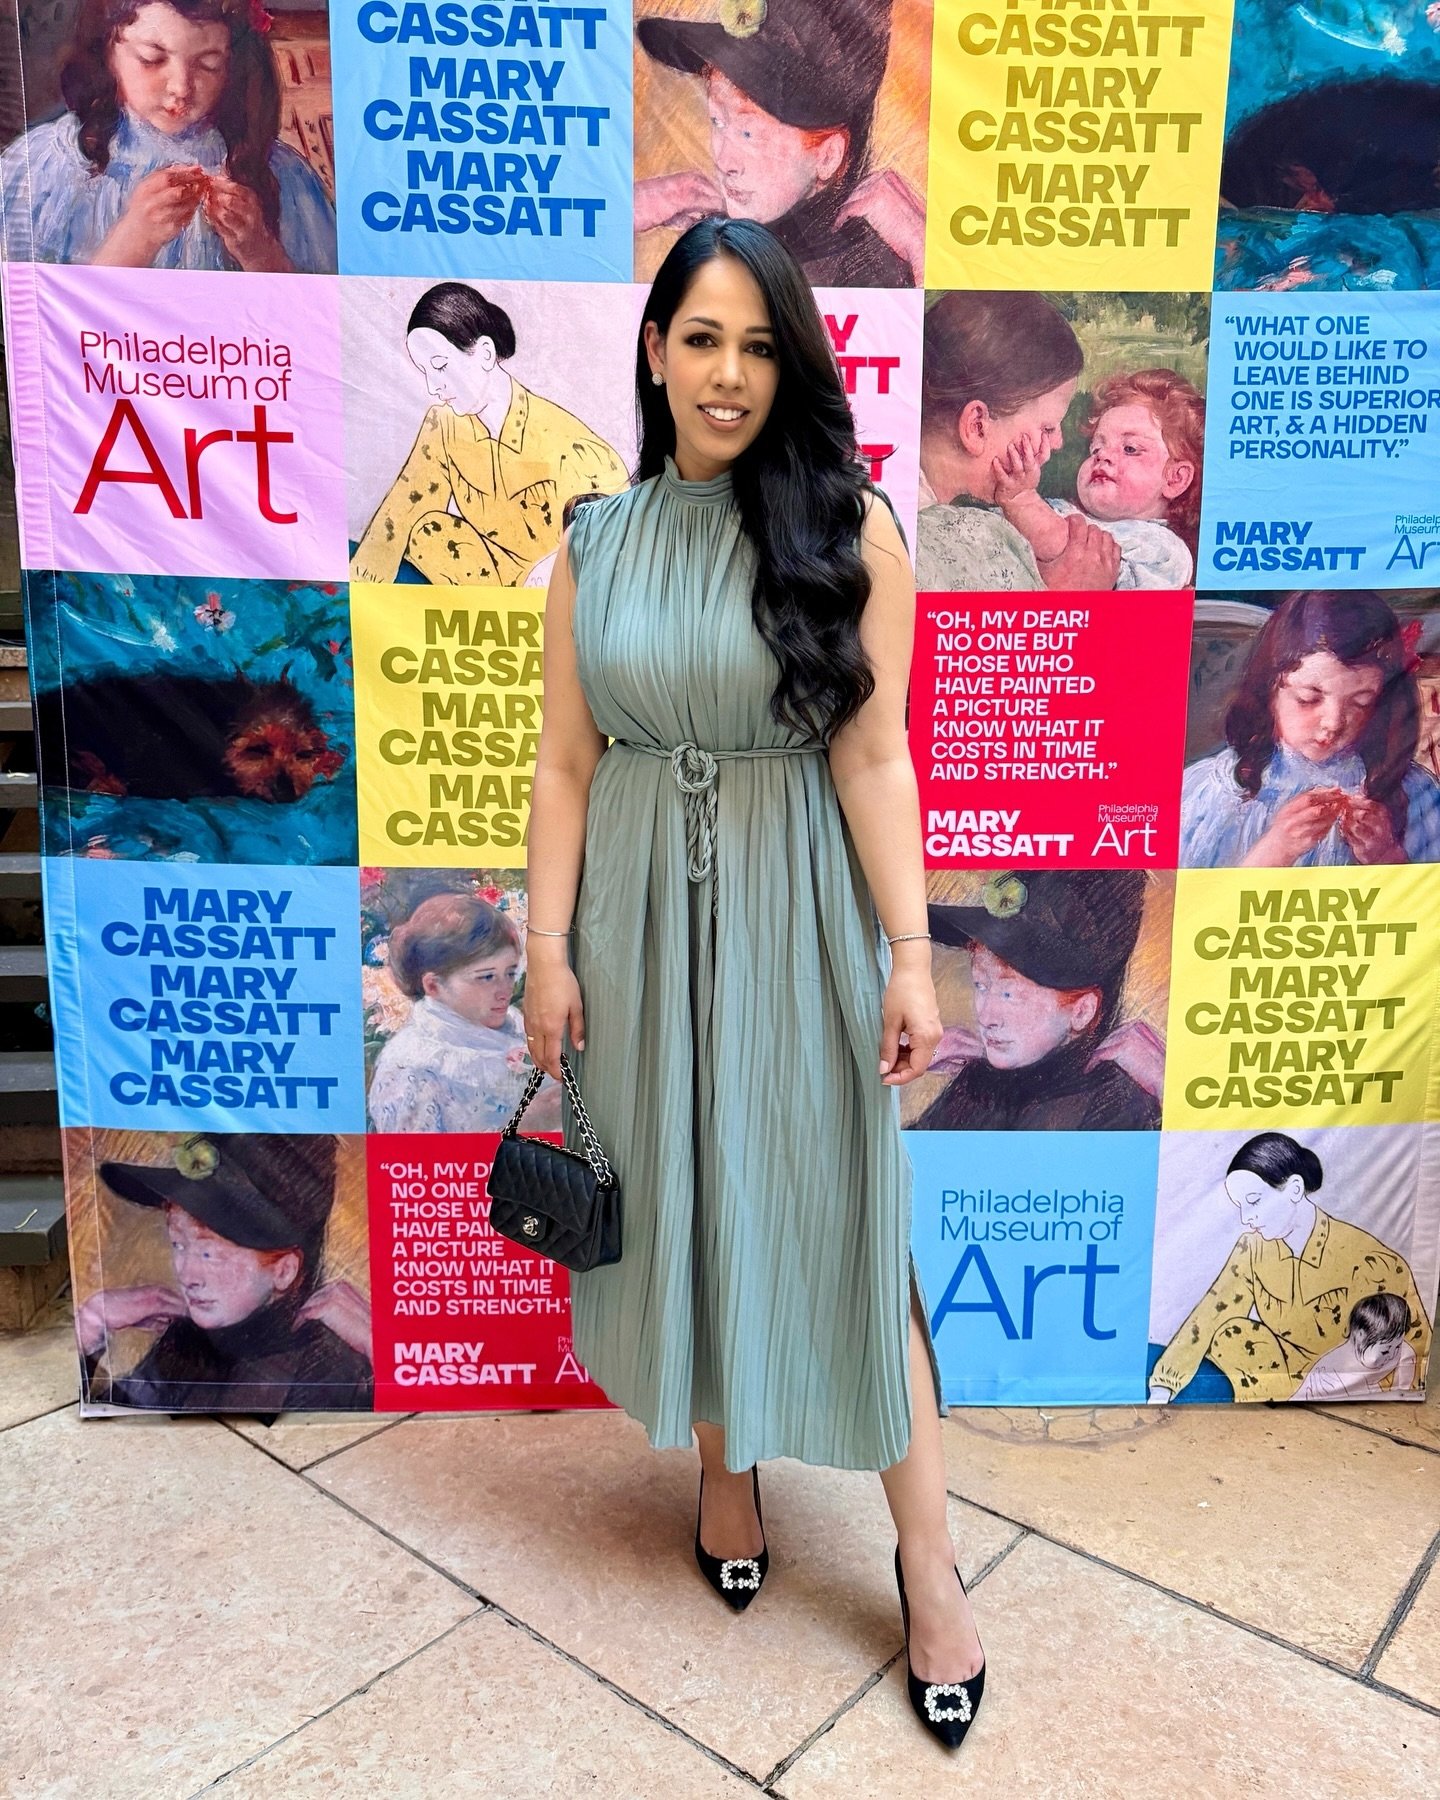 Last night @the_rittenhouse for La Vie de Cassatt&nbsp;a beautiful soir&eacute;e celebrating @philamuseum upcoming exhibition of Mary Cassatt at Work on May 18 make sure to check it out! #philamuseum #cassattatwork 

rittenhouse, the rittenhouse hote